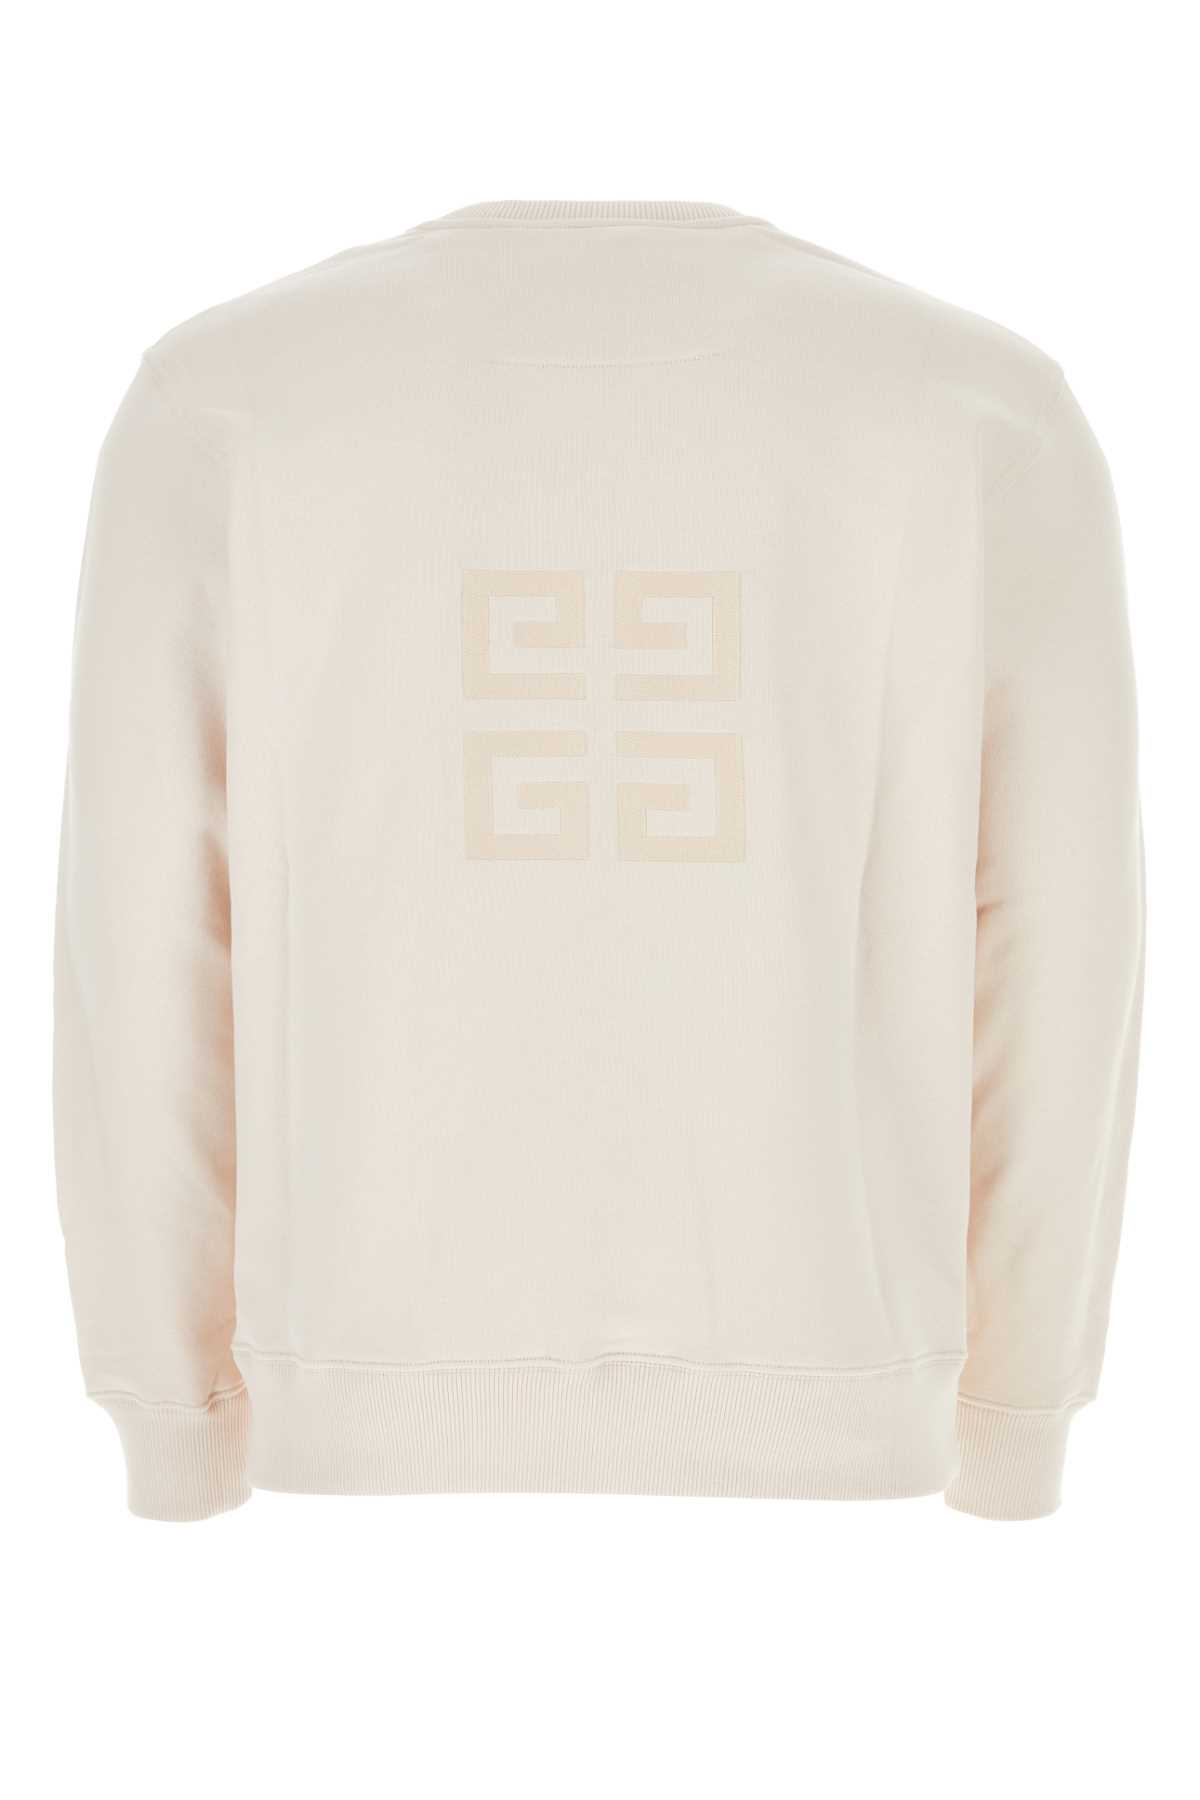 Shop Givenchy Light Pink Cotton Sweatshirt In Nudepink